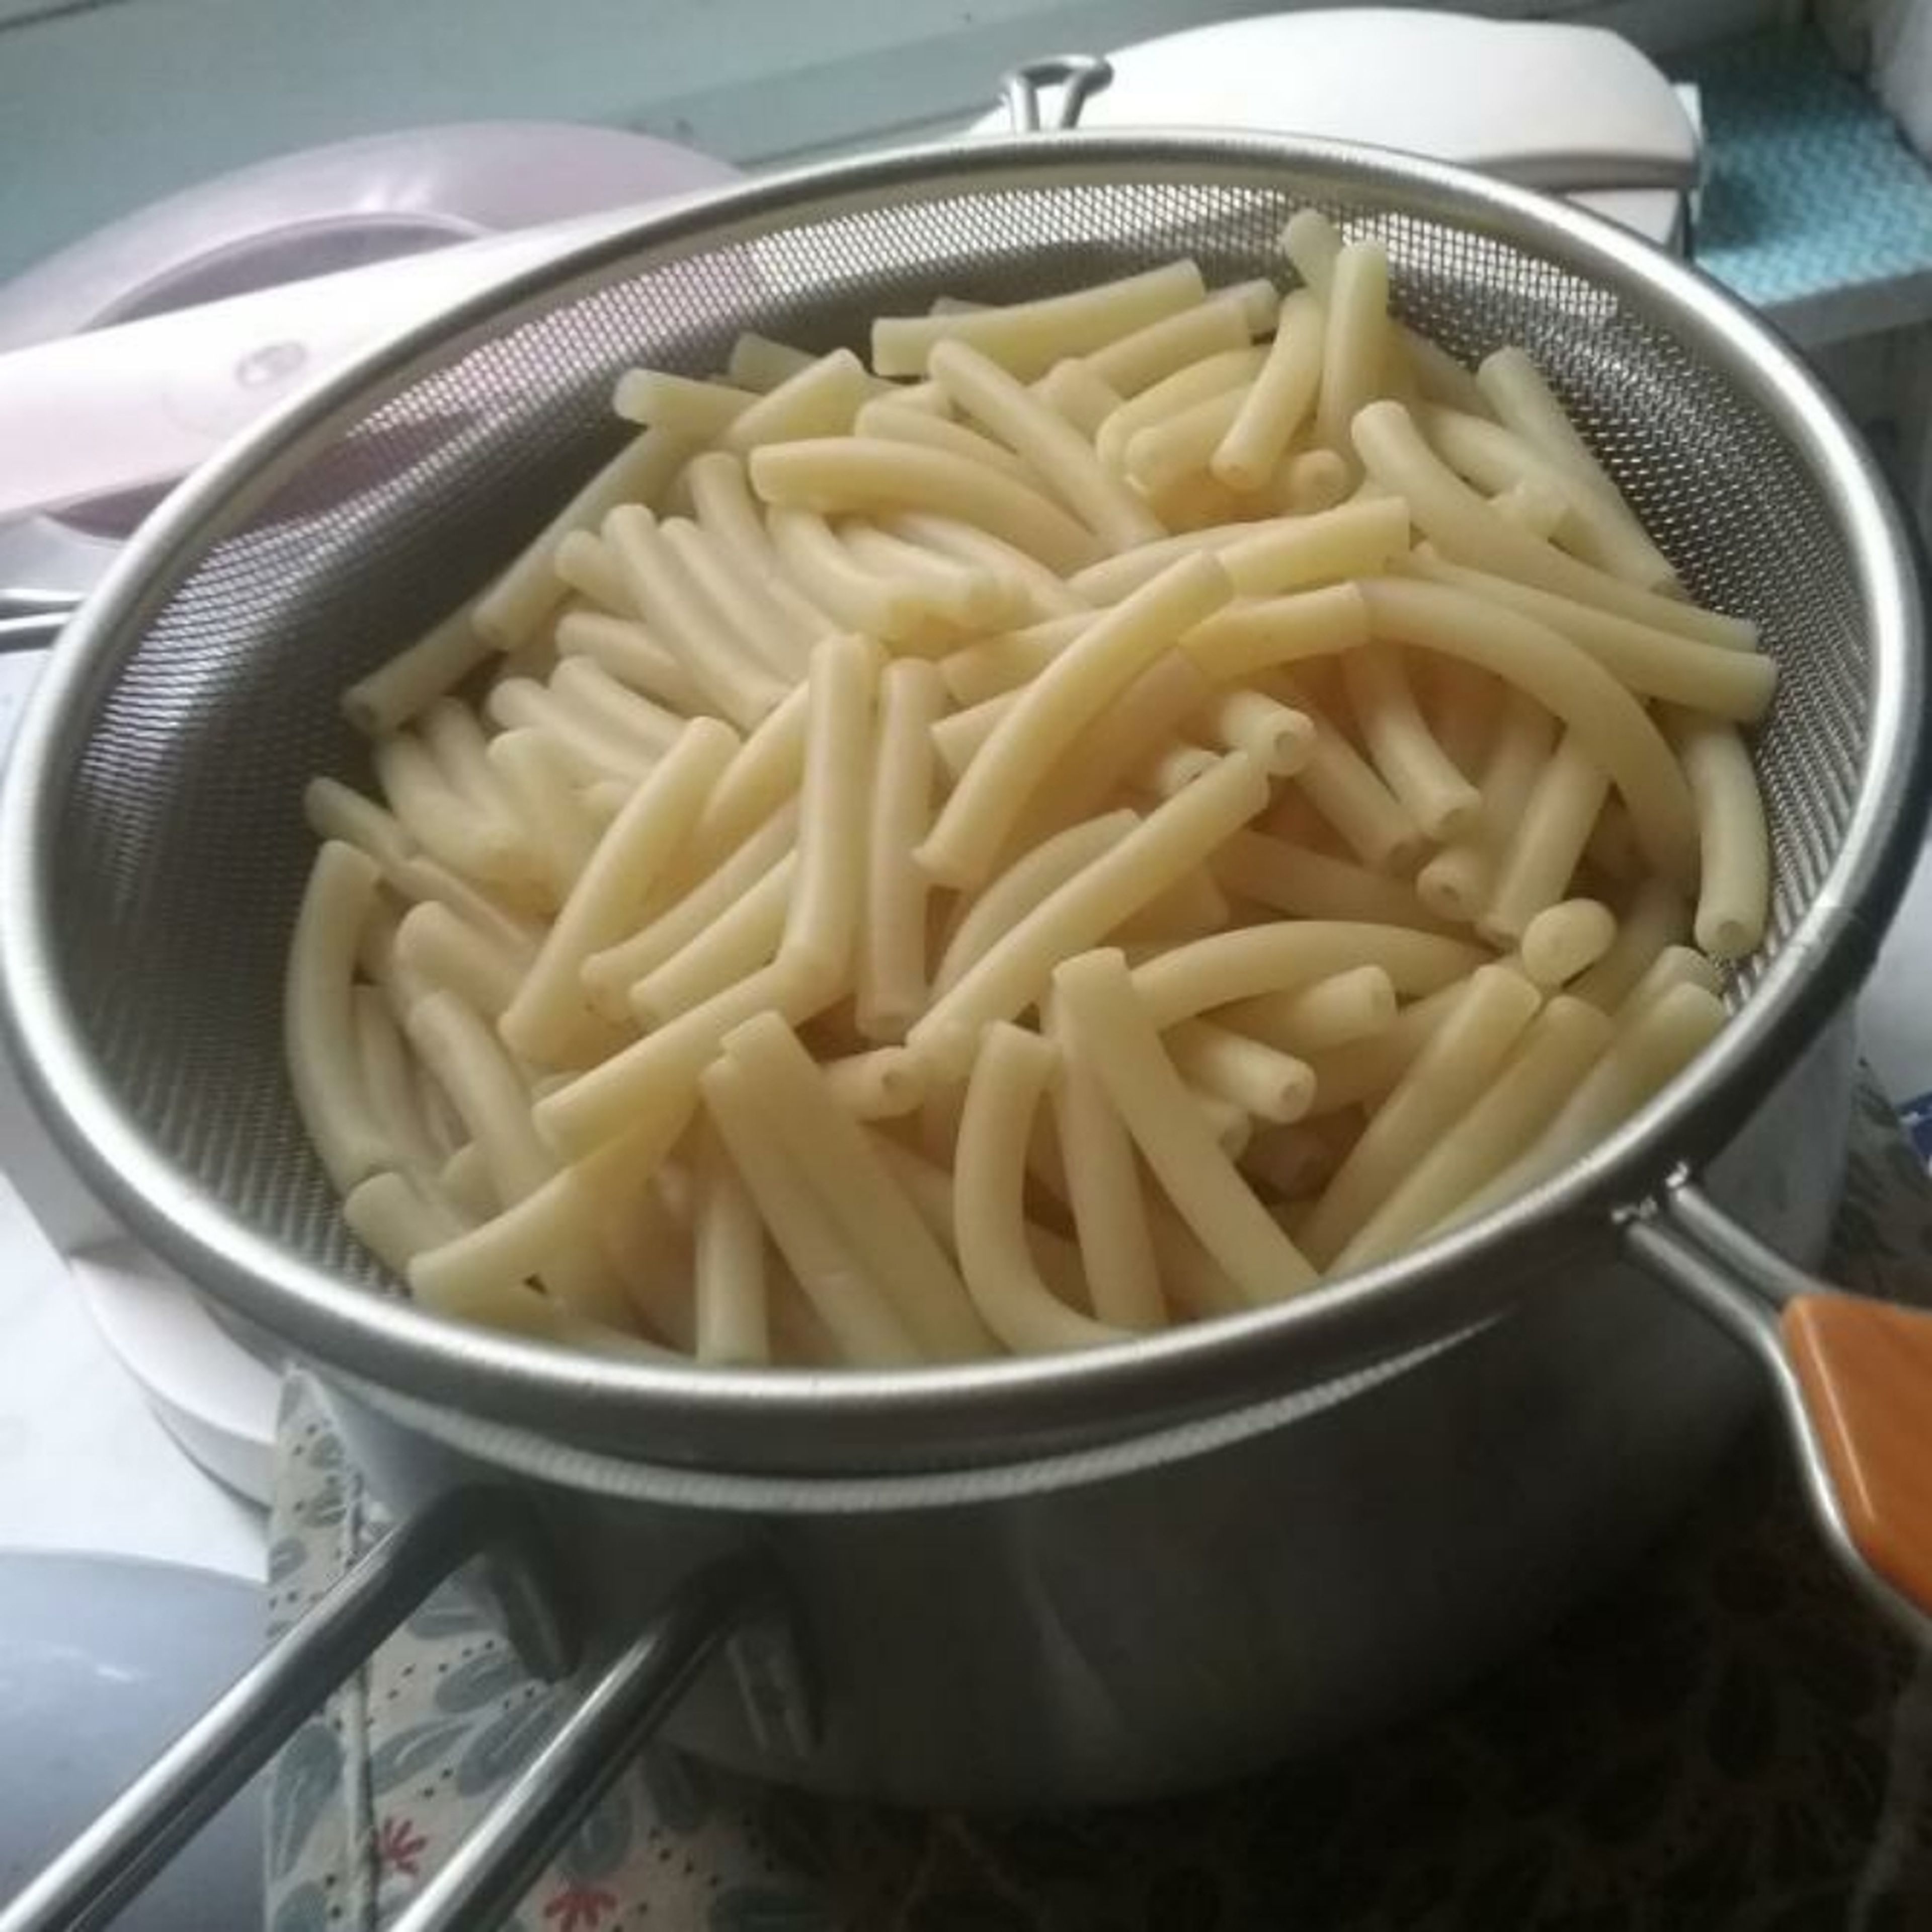 In the beginning, boil the pasta. Make sure to not over-cook it!